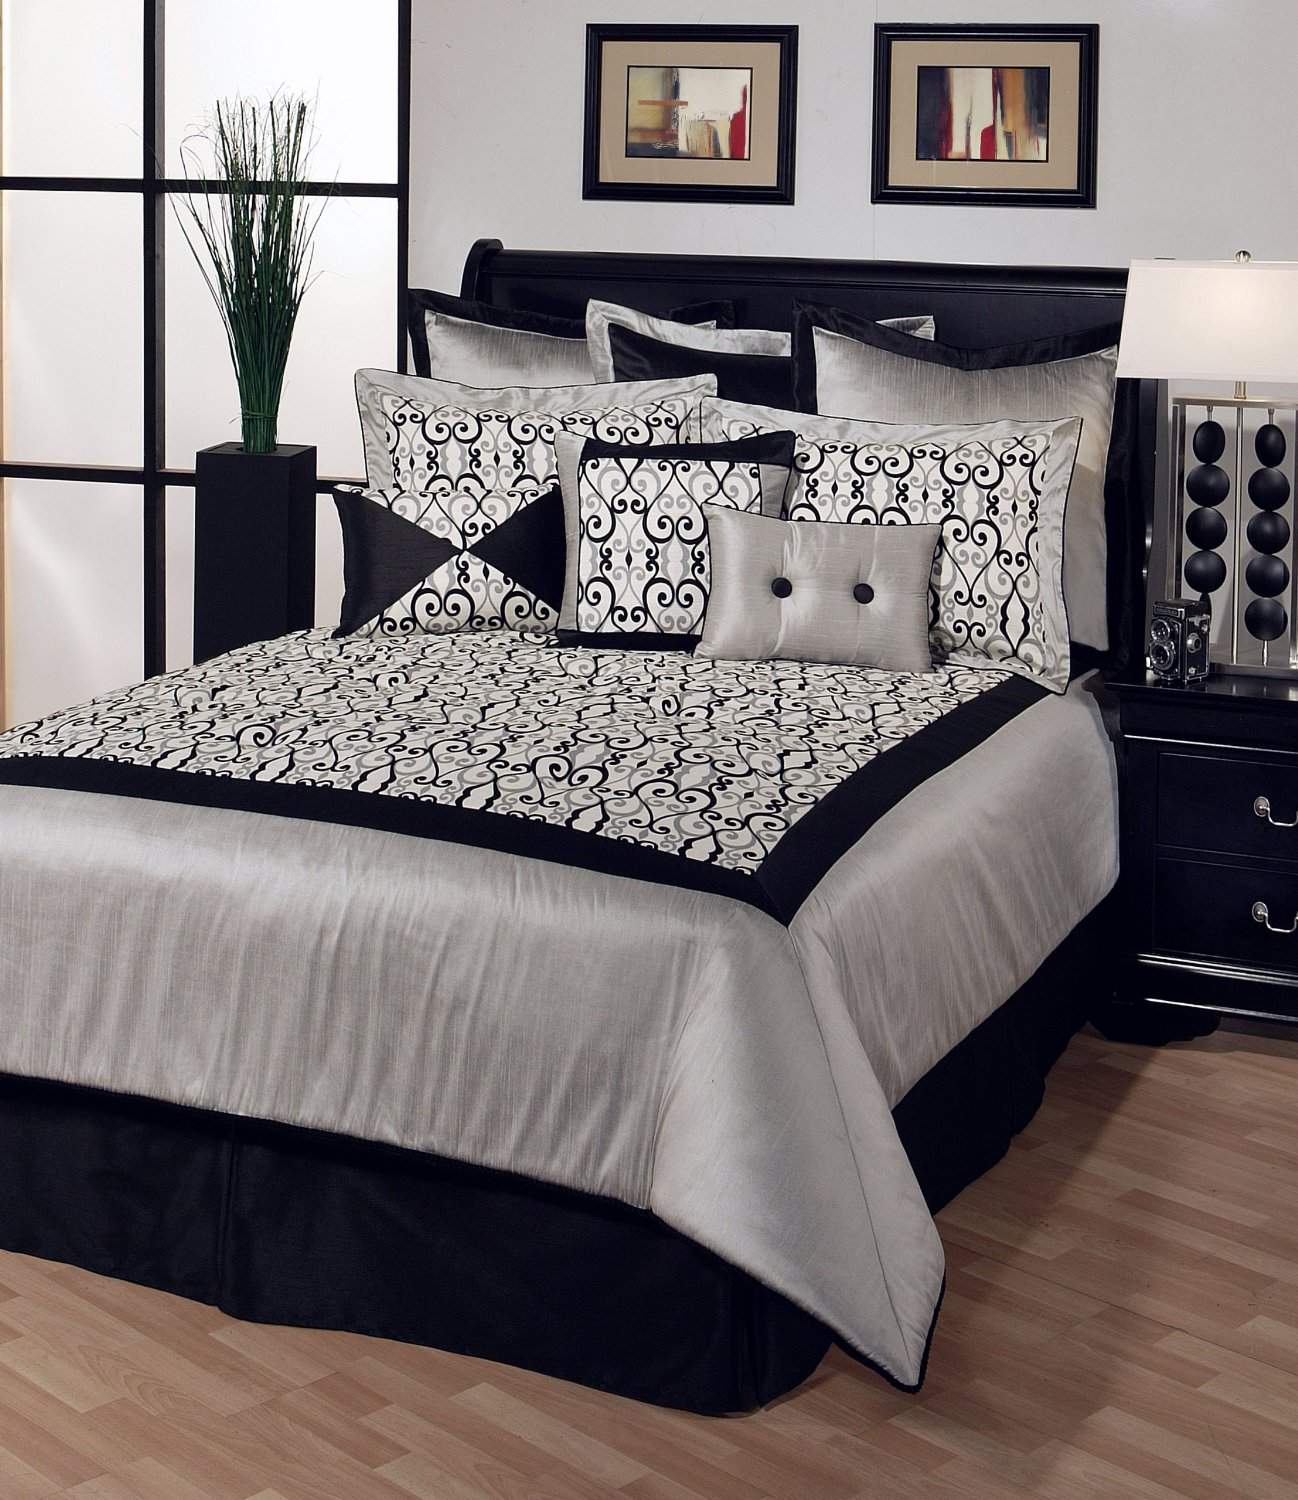 Home Decorate Ideas: Black and White Bedrooms Pictures Ideas